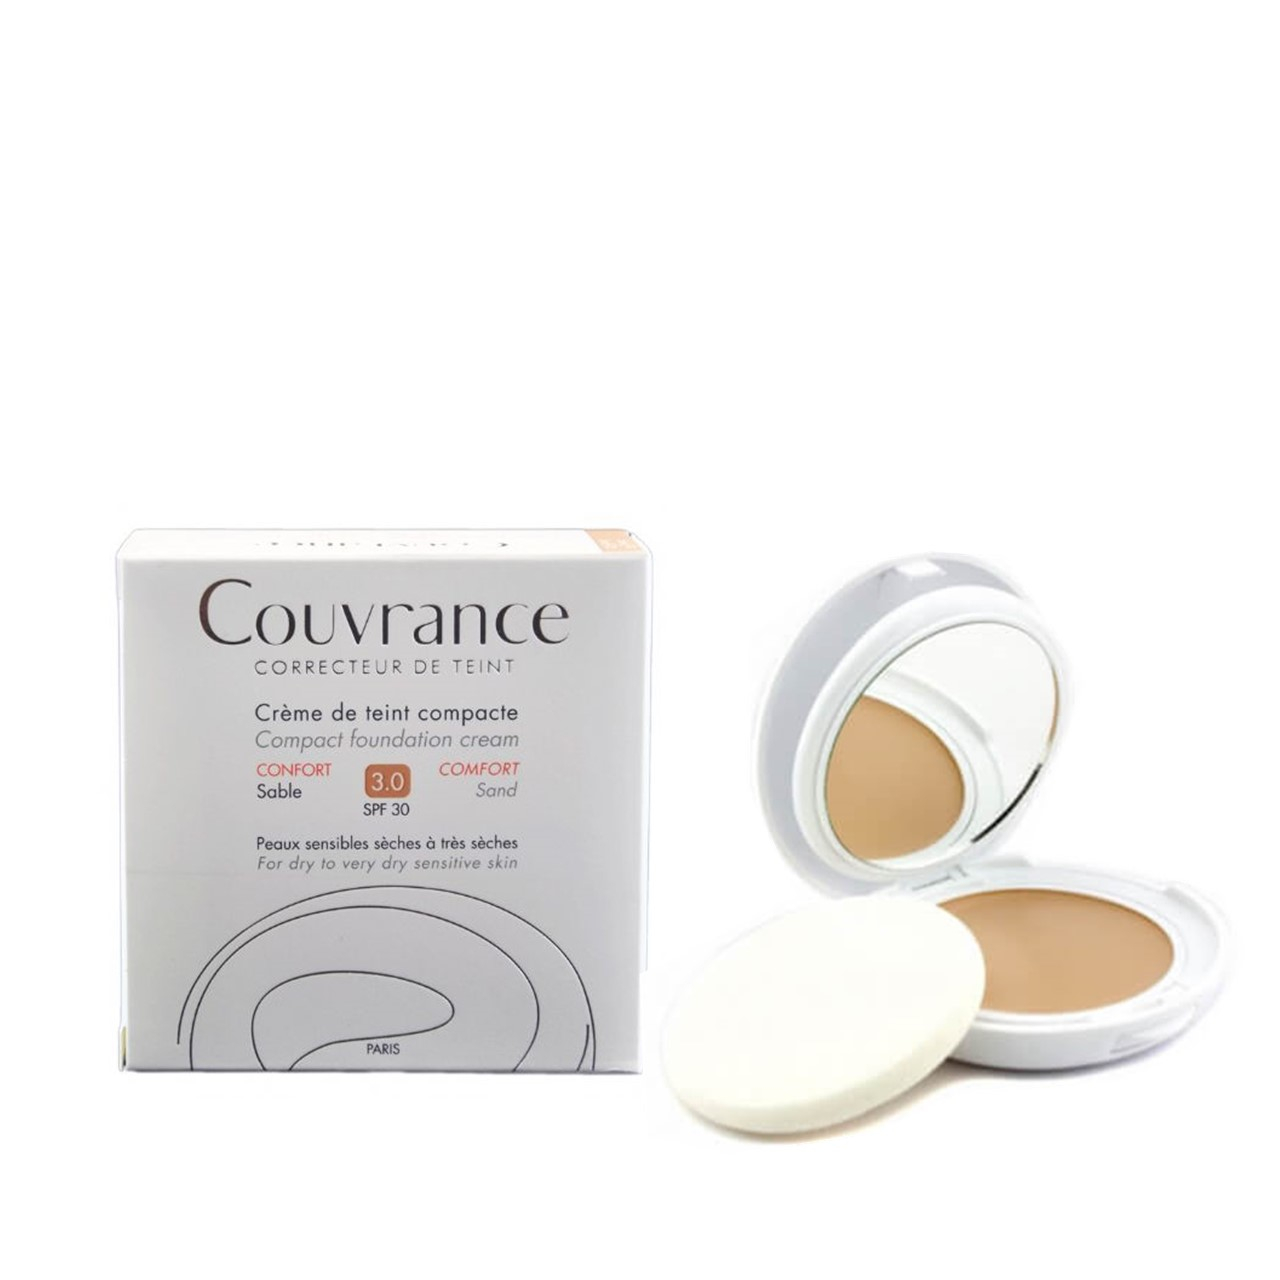 Avène Couvrance Compact Comfort Cream Foundation 3.0 Sand 10g